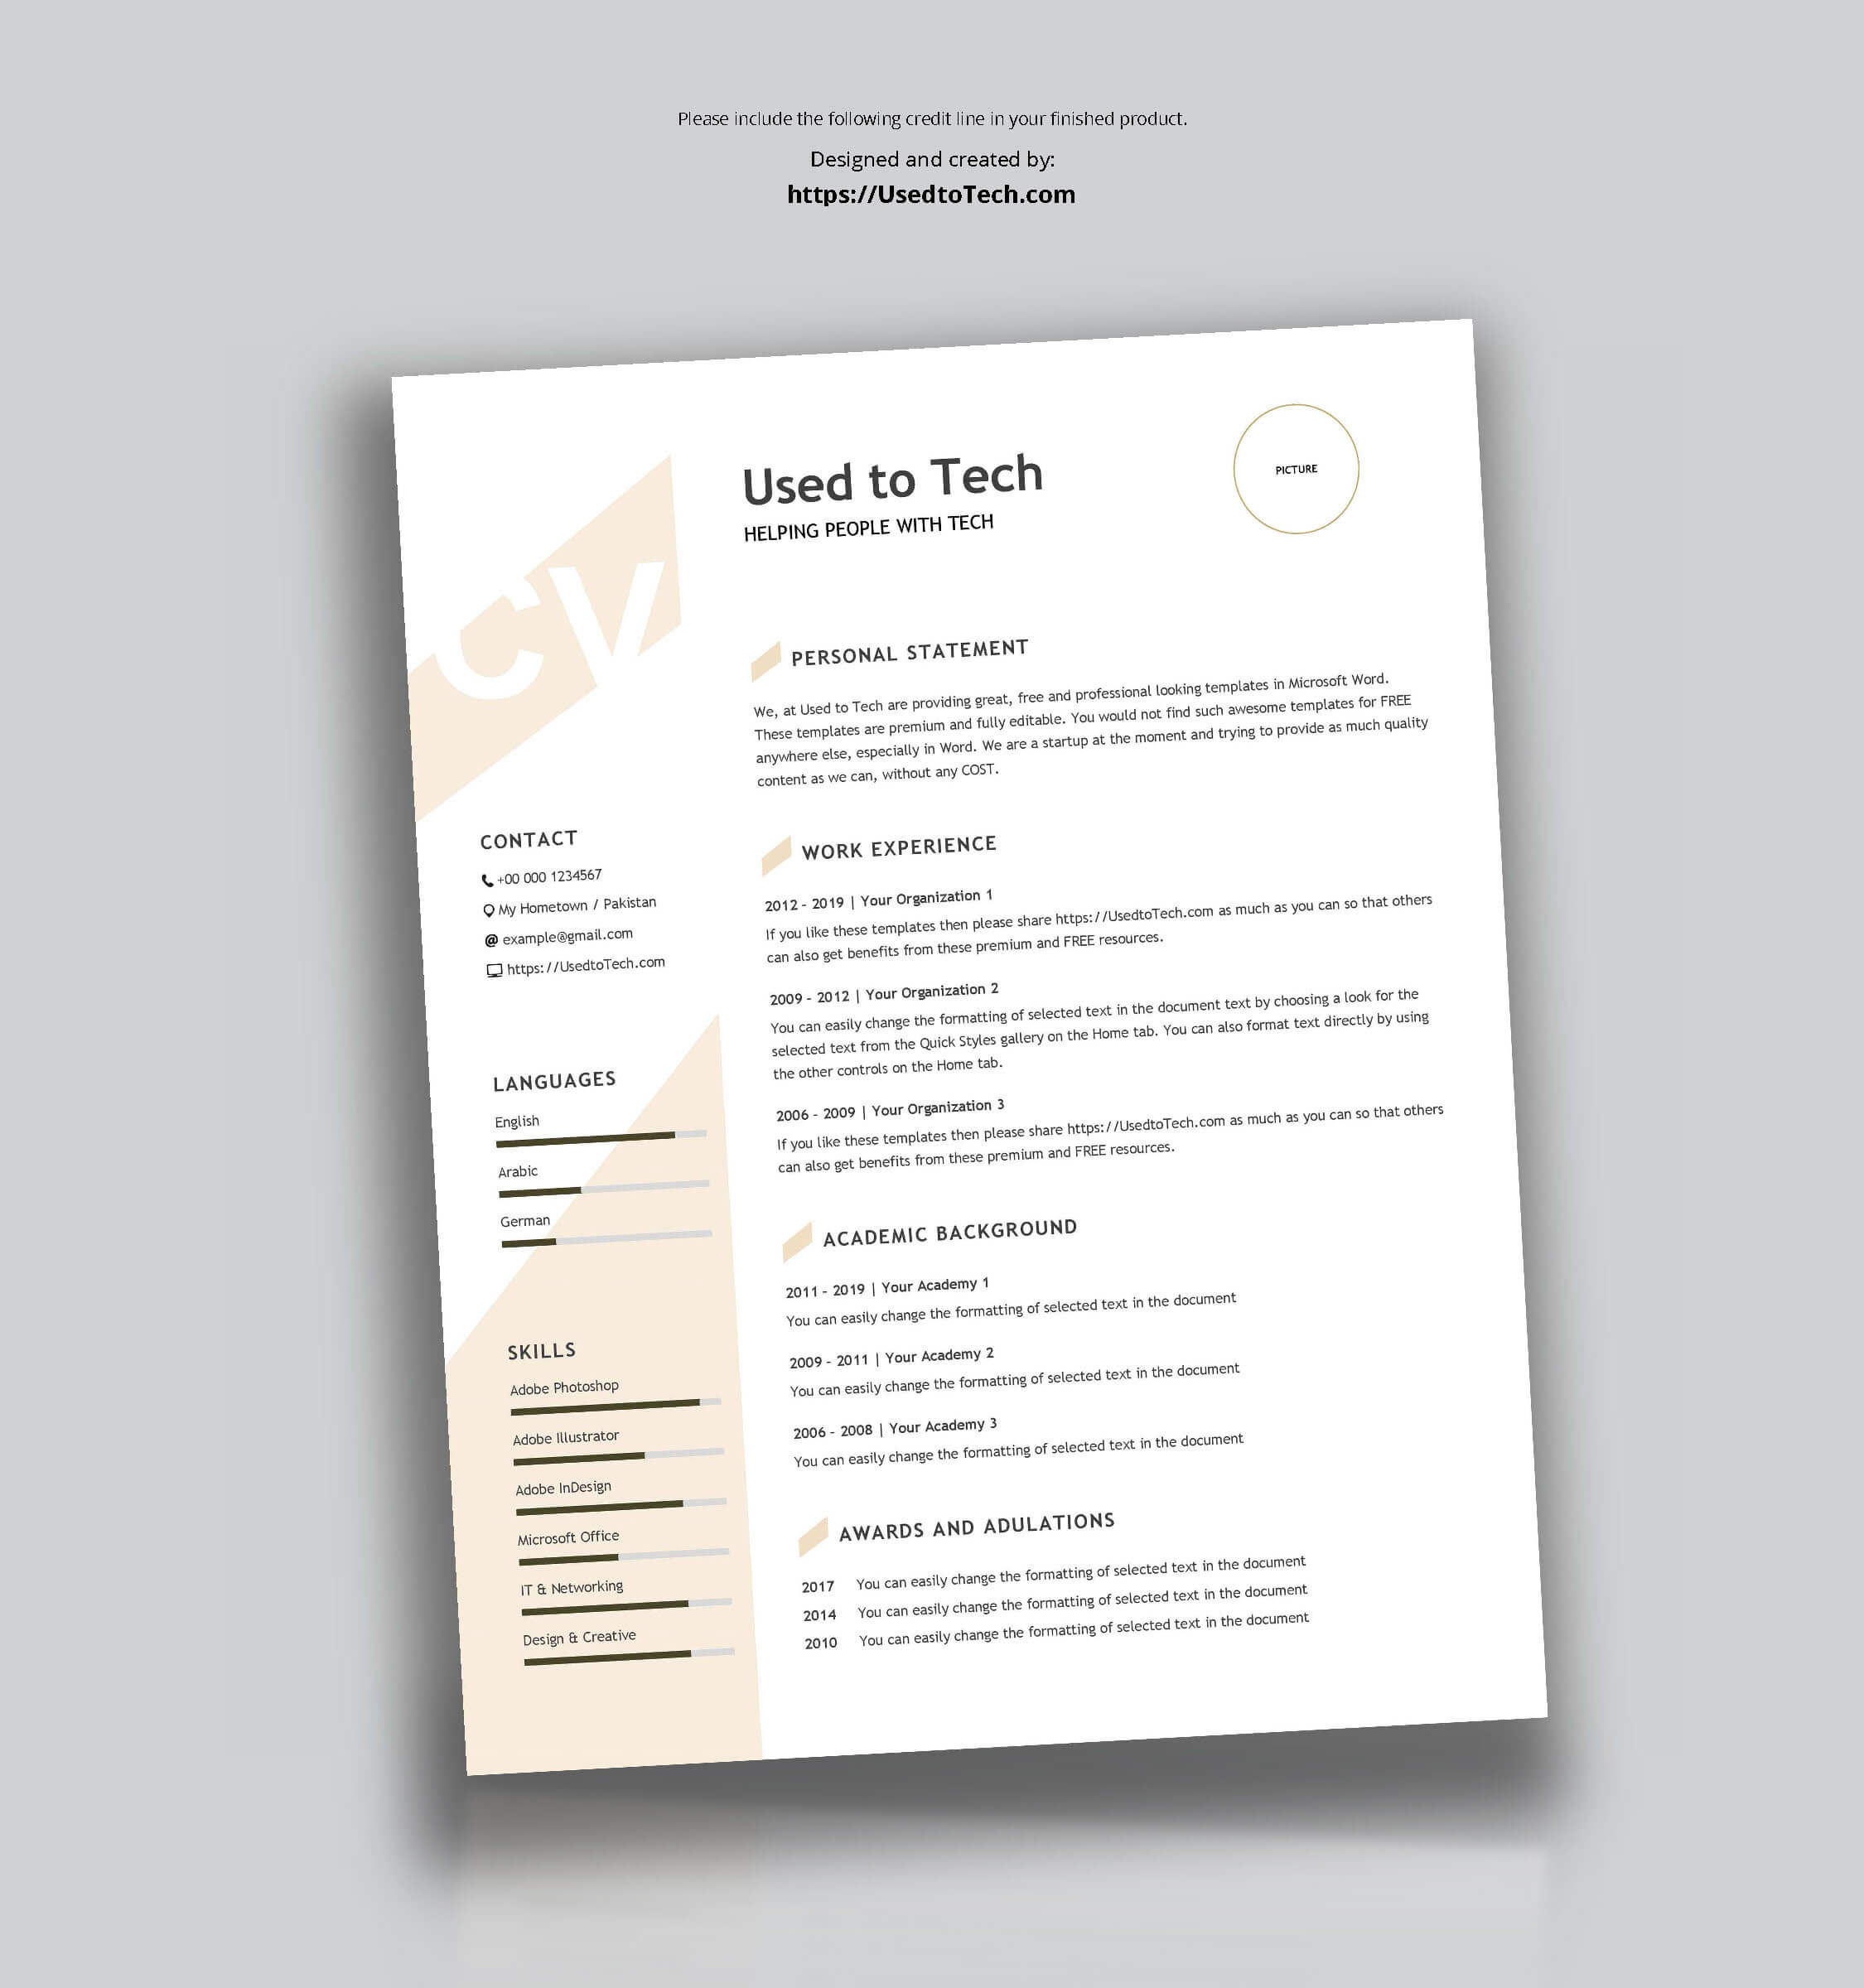 Modern Resume Template In Word Free - Used To Tech Intended For How To Find A Resume Template On Word